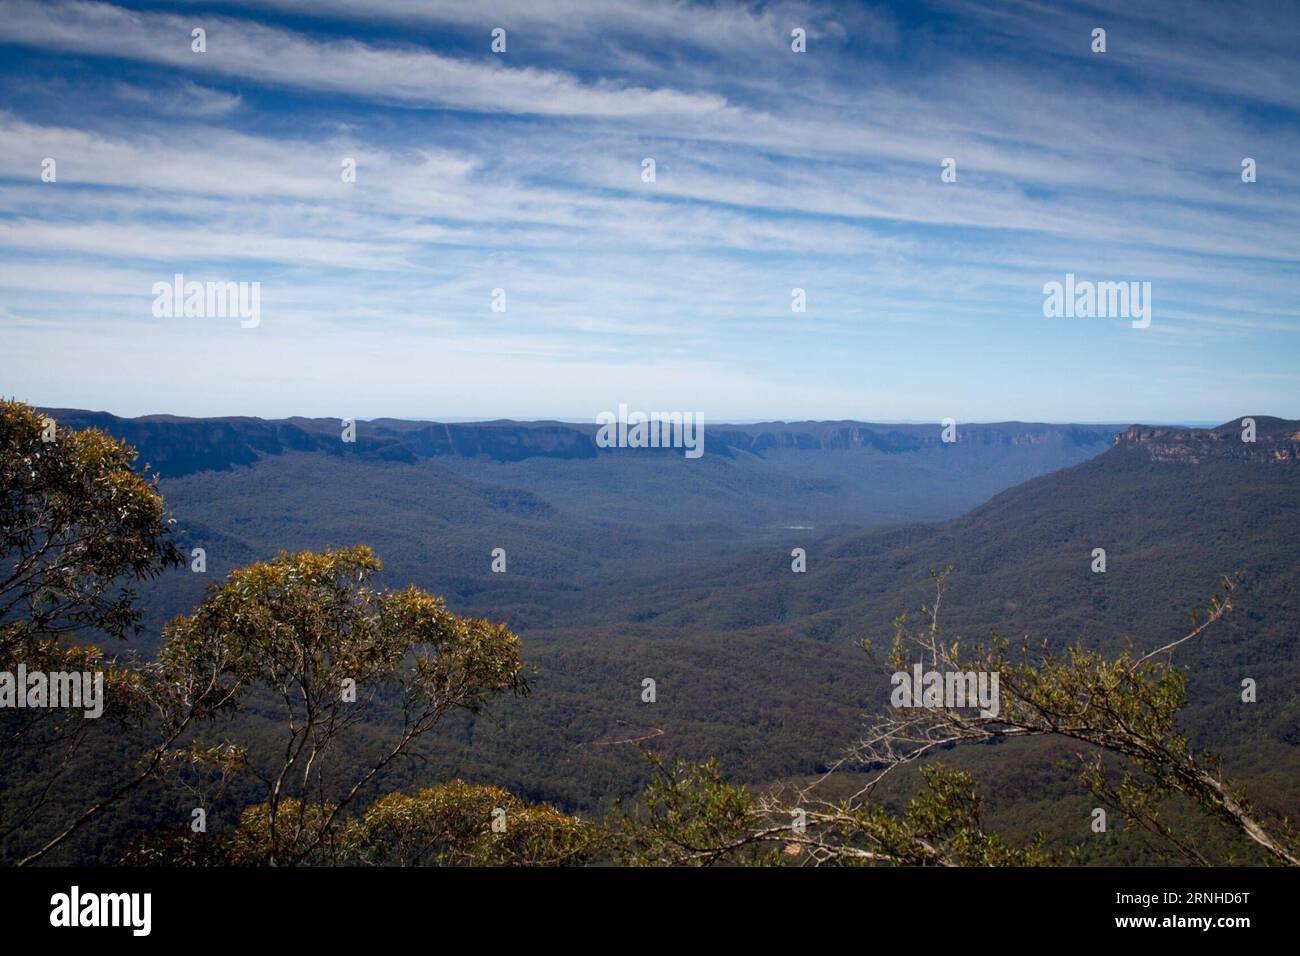 (161111) -- SYDNEY, Nov. 11, 2016 -- Photo taken on Oct. 25, 2016 shows the Blue Mountains National Park in New South Wales state, Australia. Four percent of Australia s continent is protected for conservation, encompassed within just over 500 national parks, or some 28 million hectares of land. Most national parks are managed by Australia s state and territory governments -- states are responsible for land management under Australia s constitution -- though the Commonwealth Government looks after six national parks, the National Botanic Gardens and 58 individual marine reserves. )(zhf) AUSTRA Stock Photo